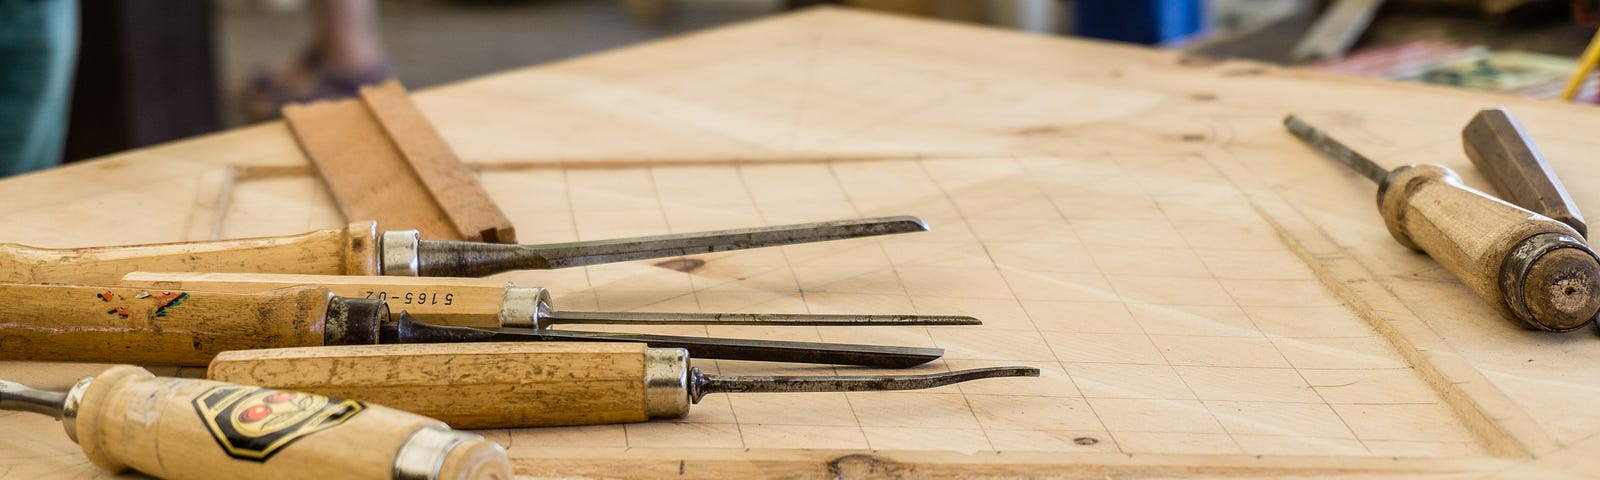 different types of chisels lying on a woodworking worktable